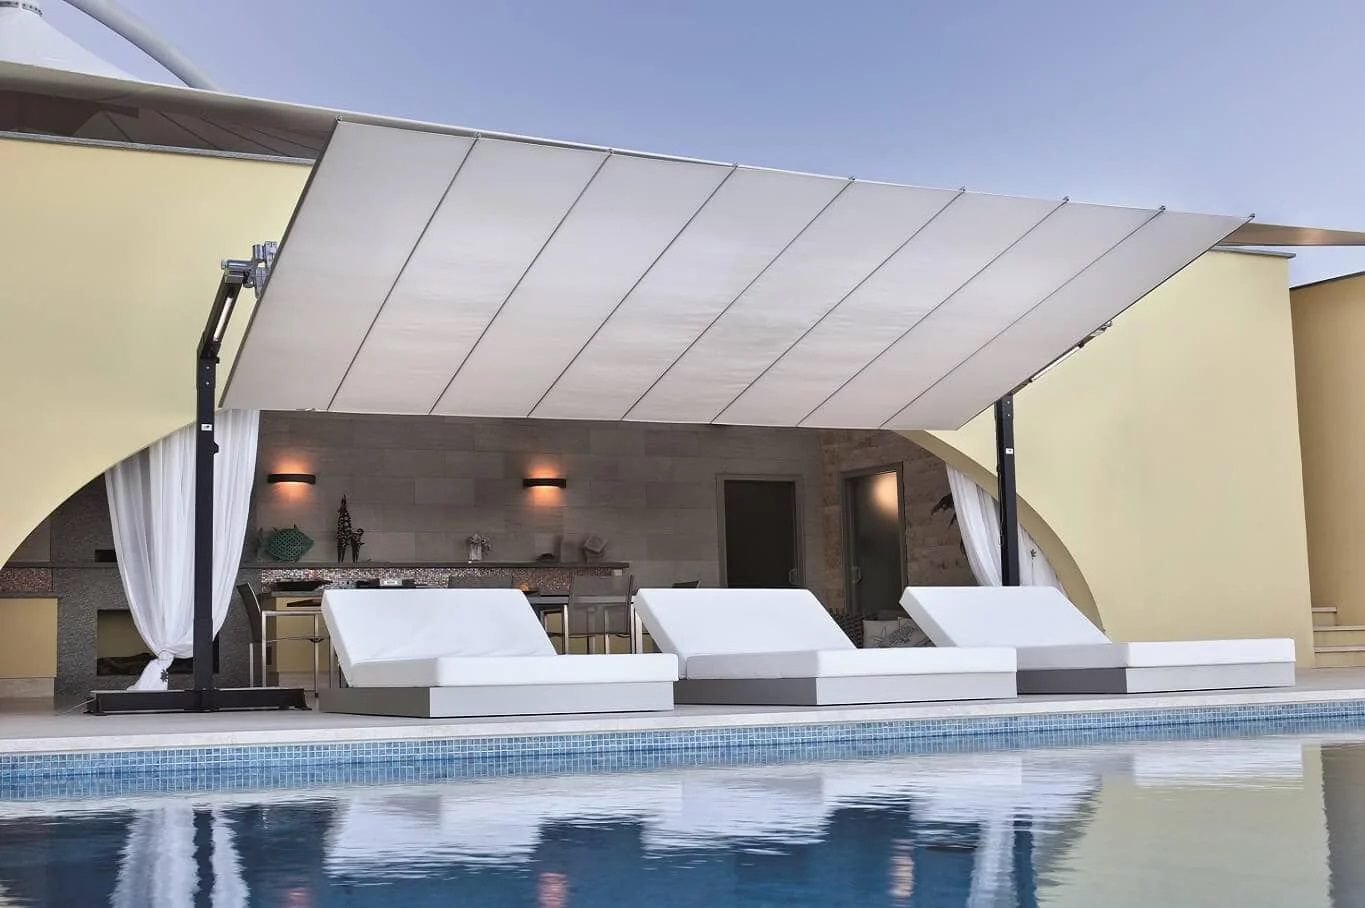 A portable retractable awning near a pool